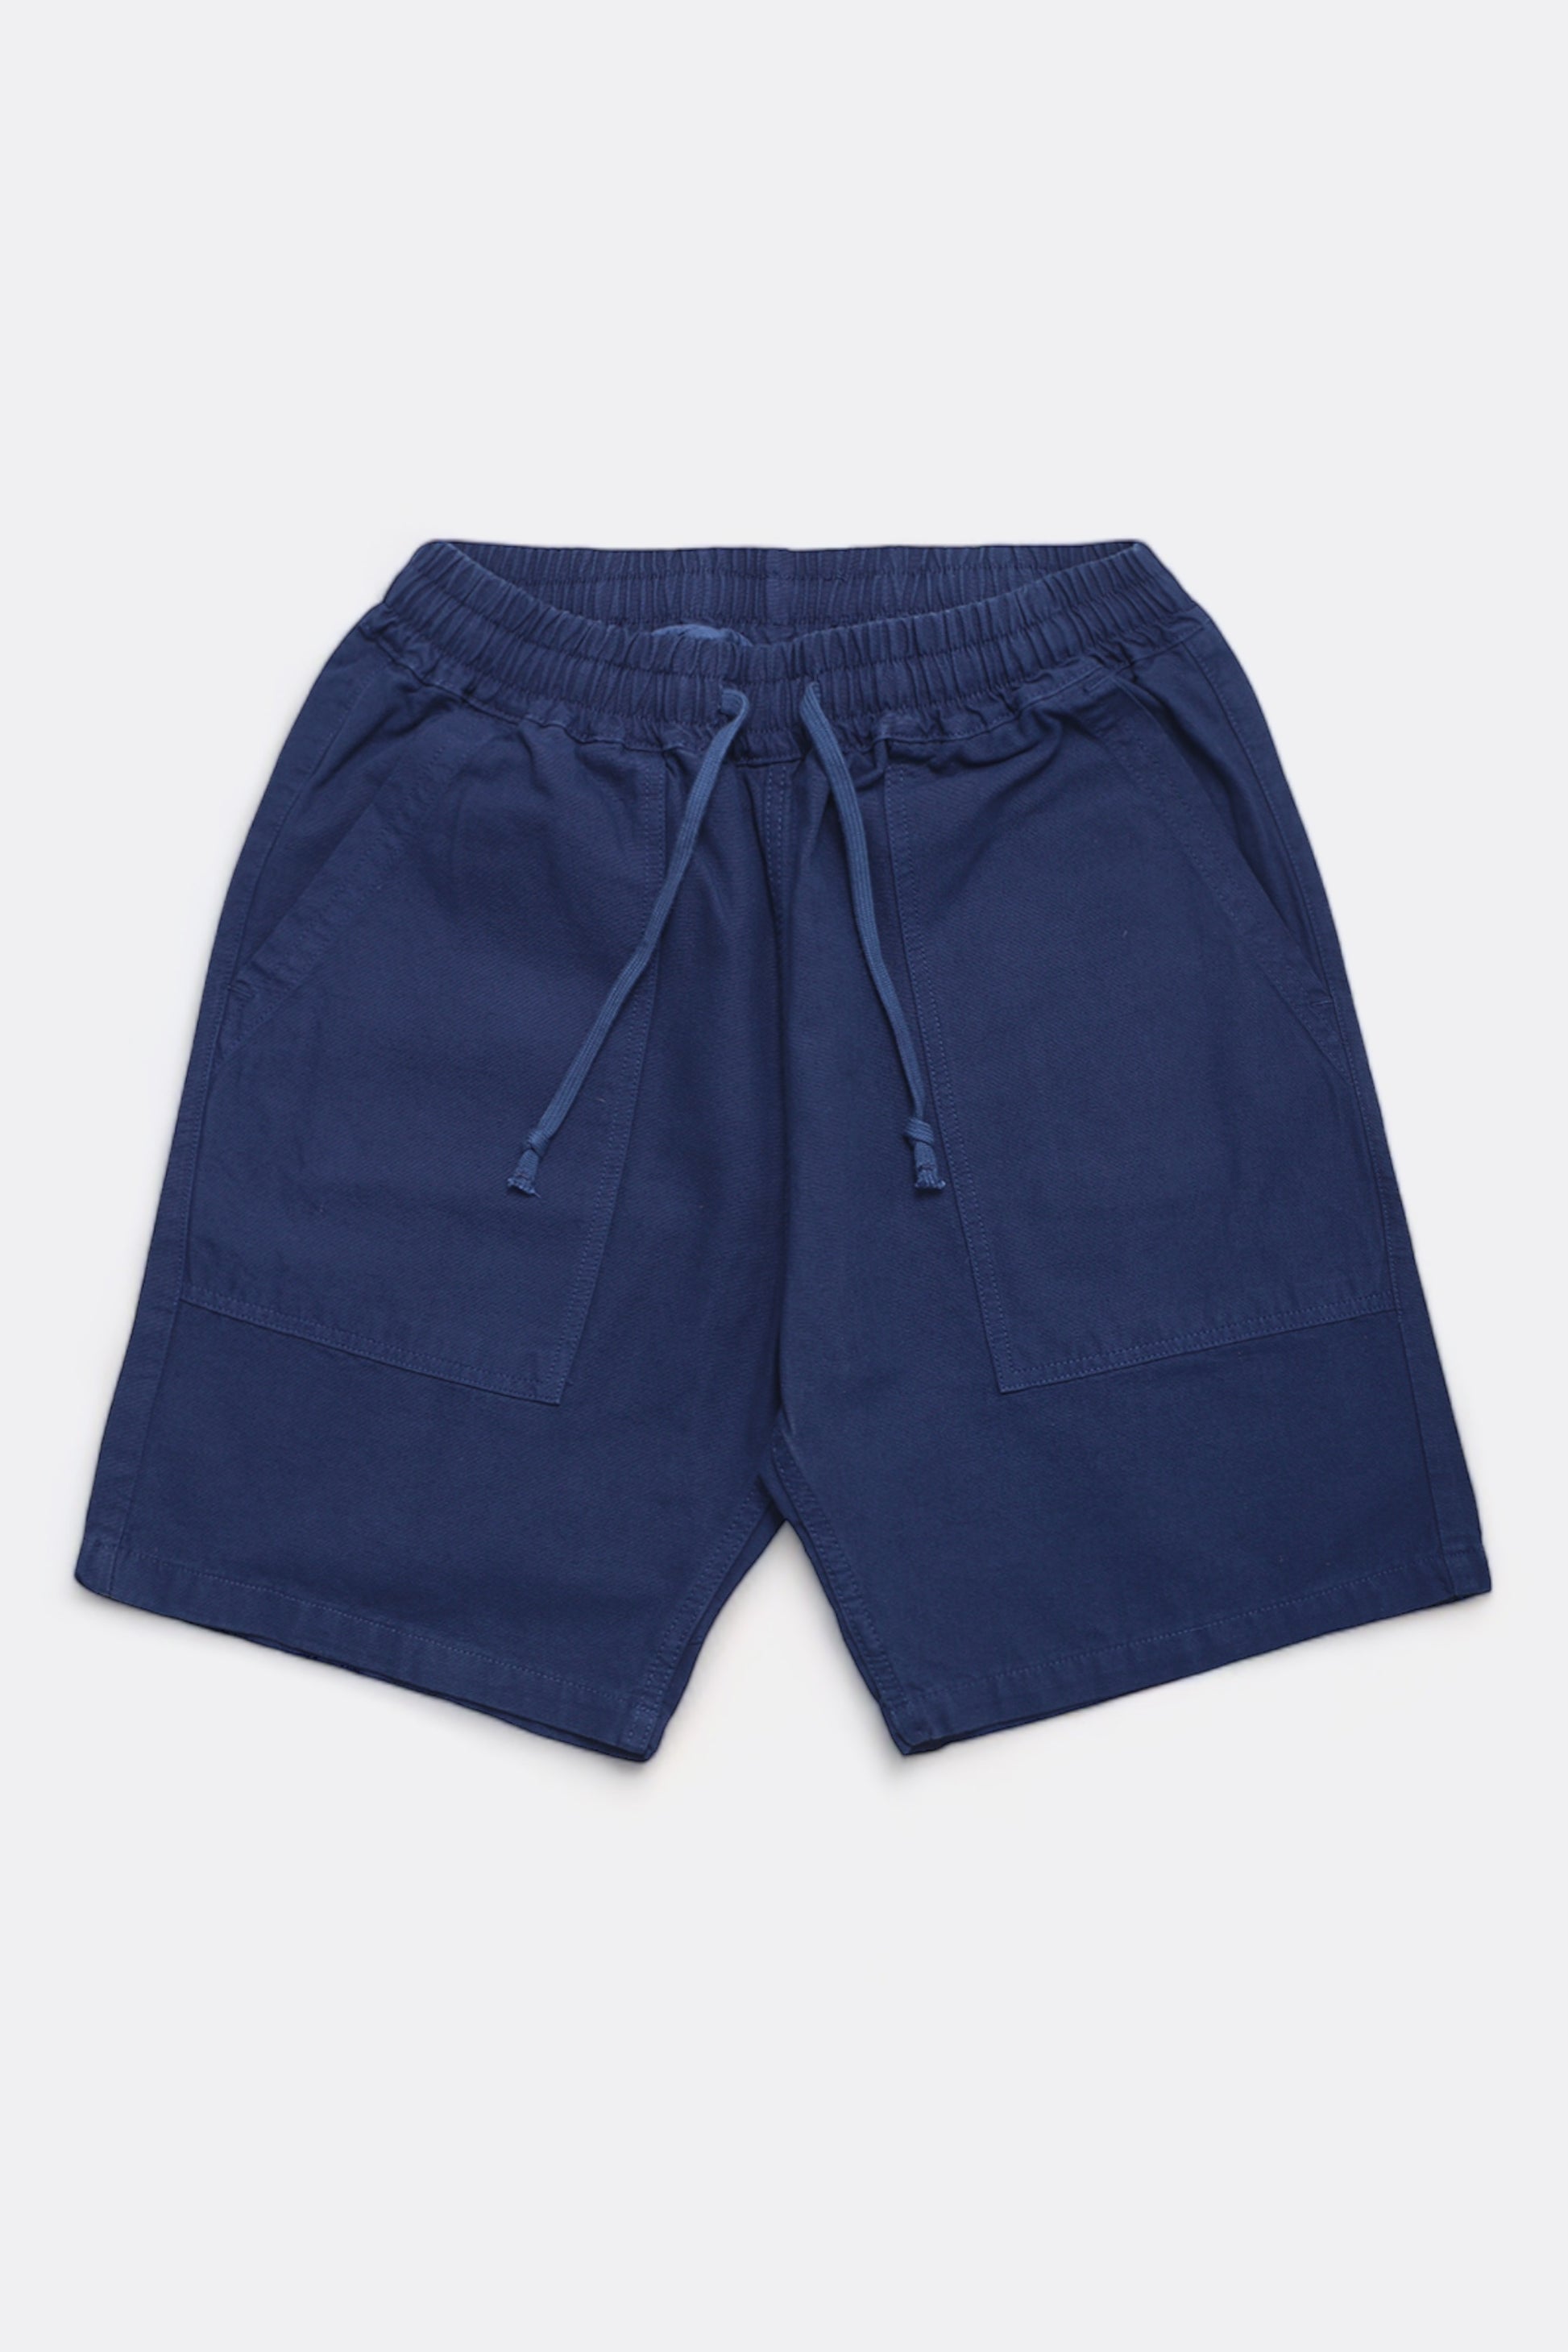 Service Works - Canvas Chef Shorts (Navy)